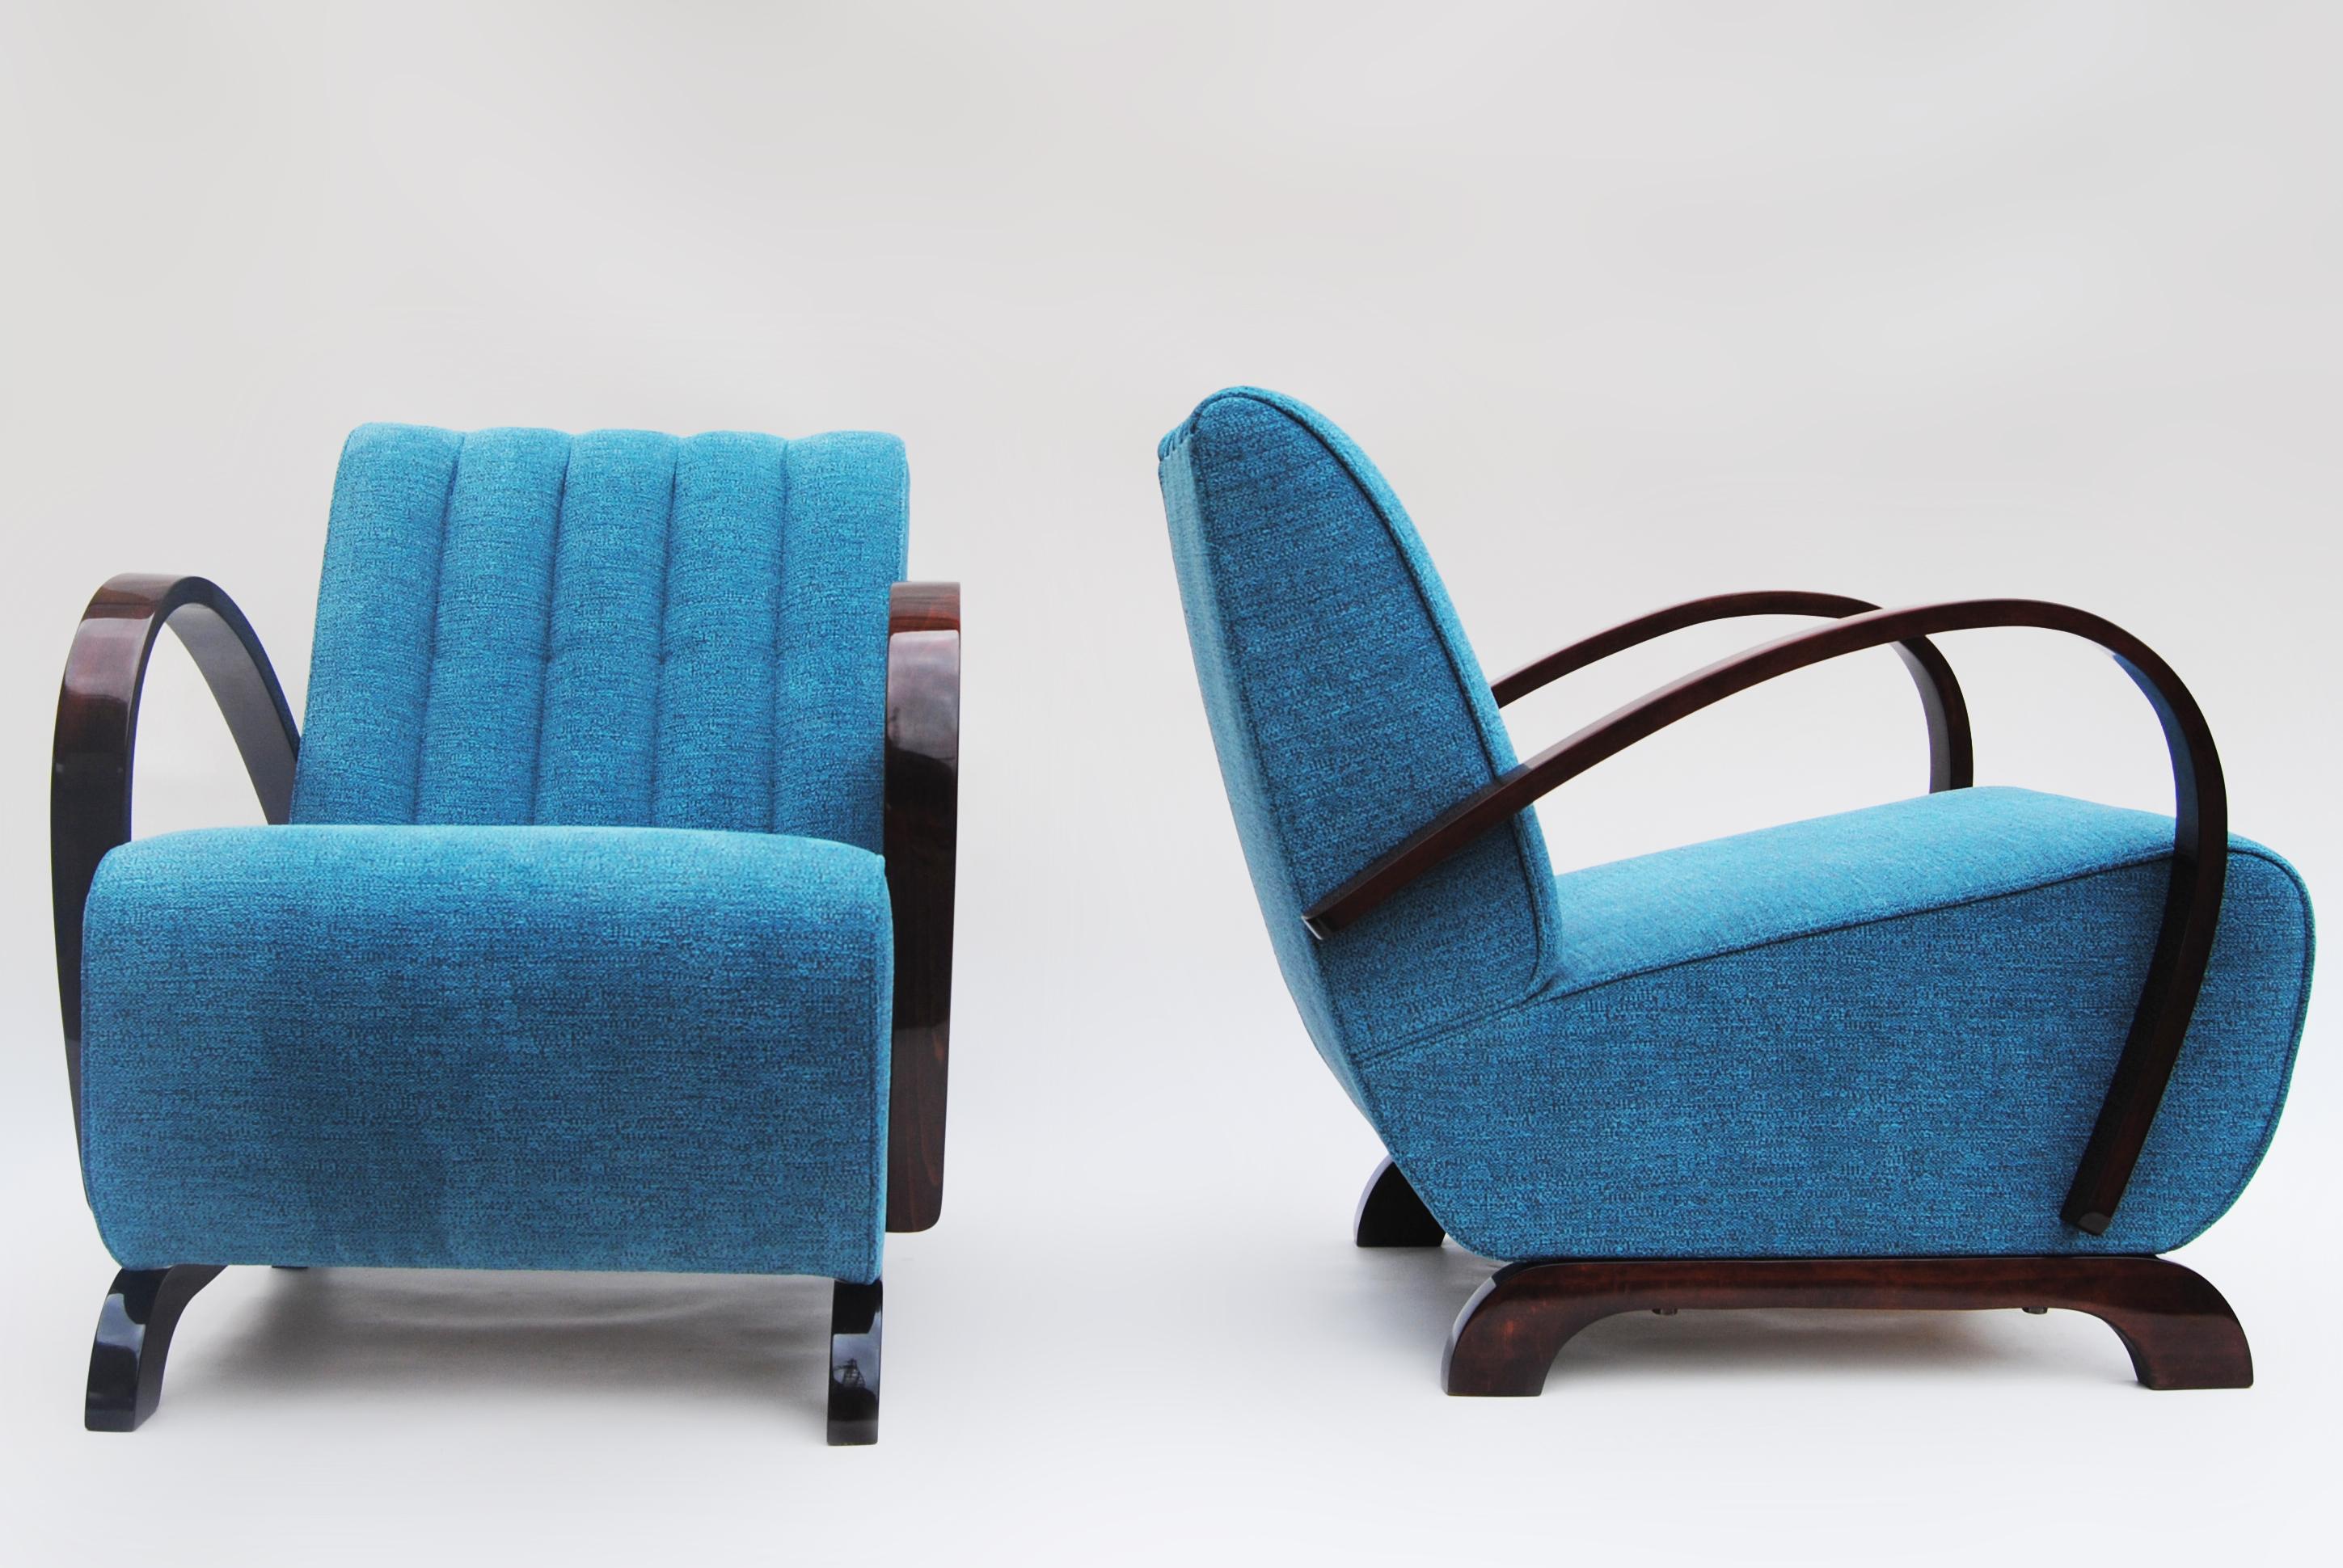 Art Deco Pair of Armchairs Designed by Jindrich Halabala

Period: 1930-1939
Designer: Jindrich Halabala
Maker: UP Zavody
Source: Czechia (Czechoslovakia)
Material: Walnut

With these armchairs, it is possible to change the fabric (leather) and color